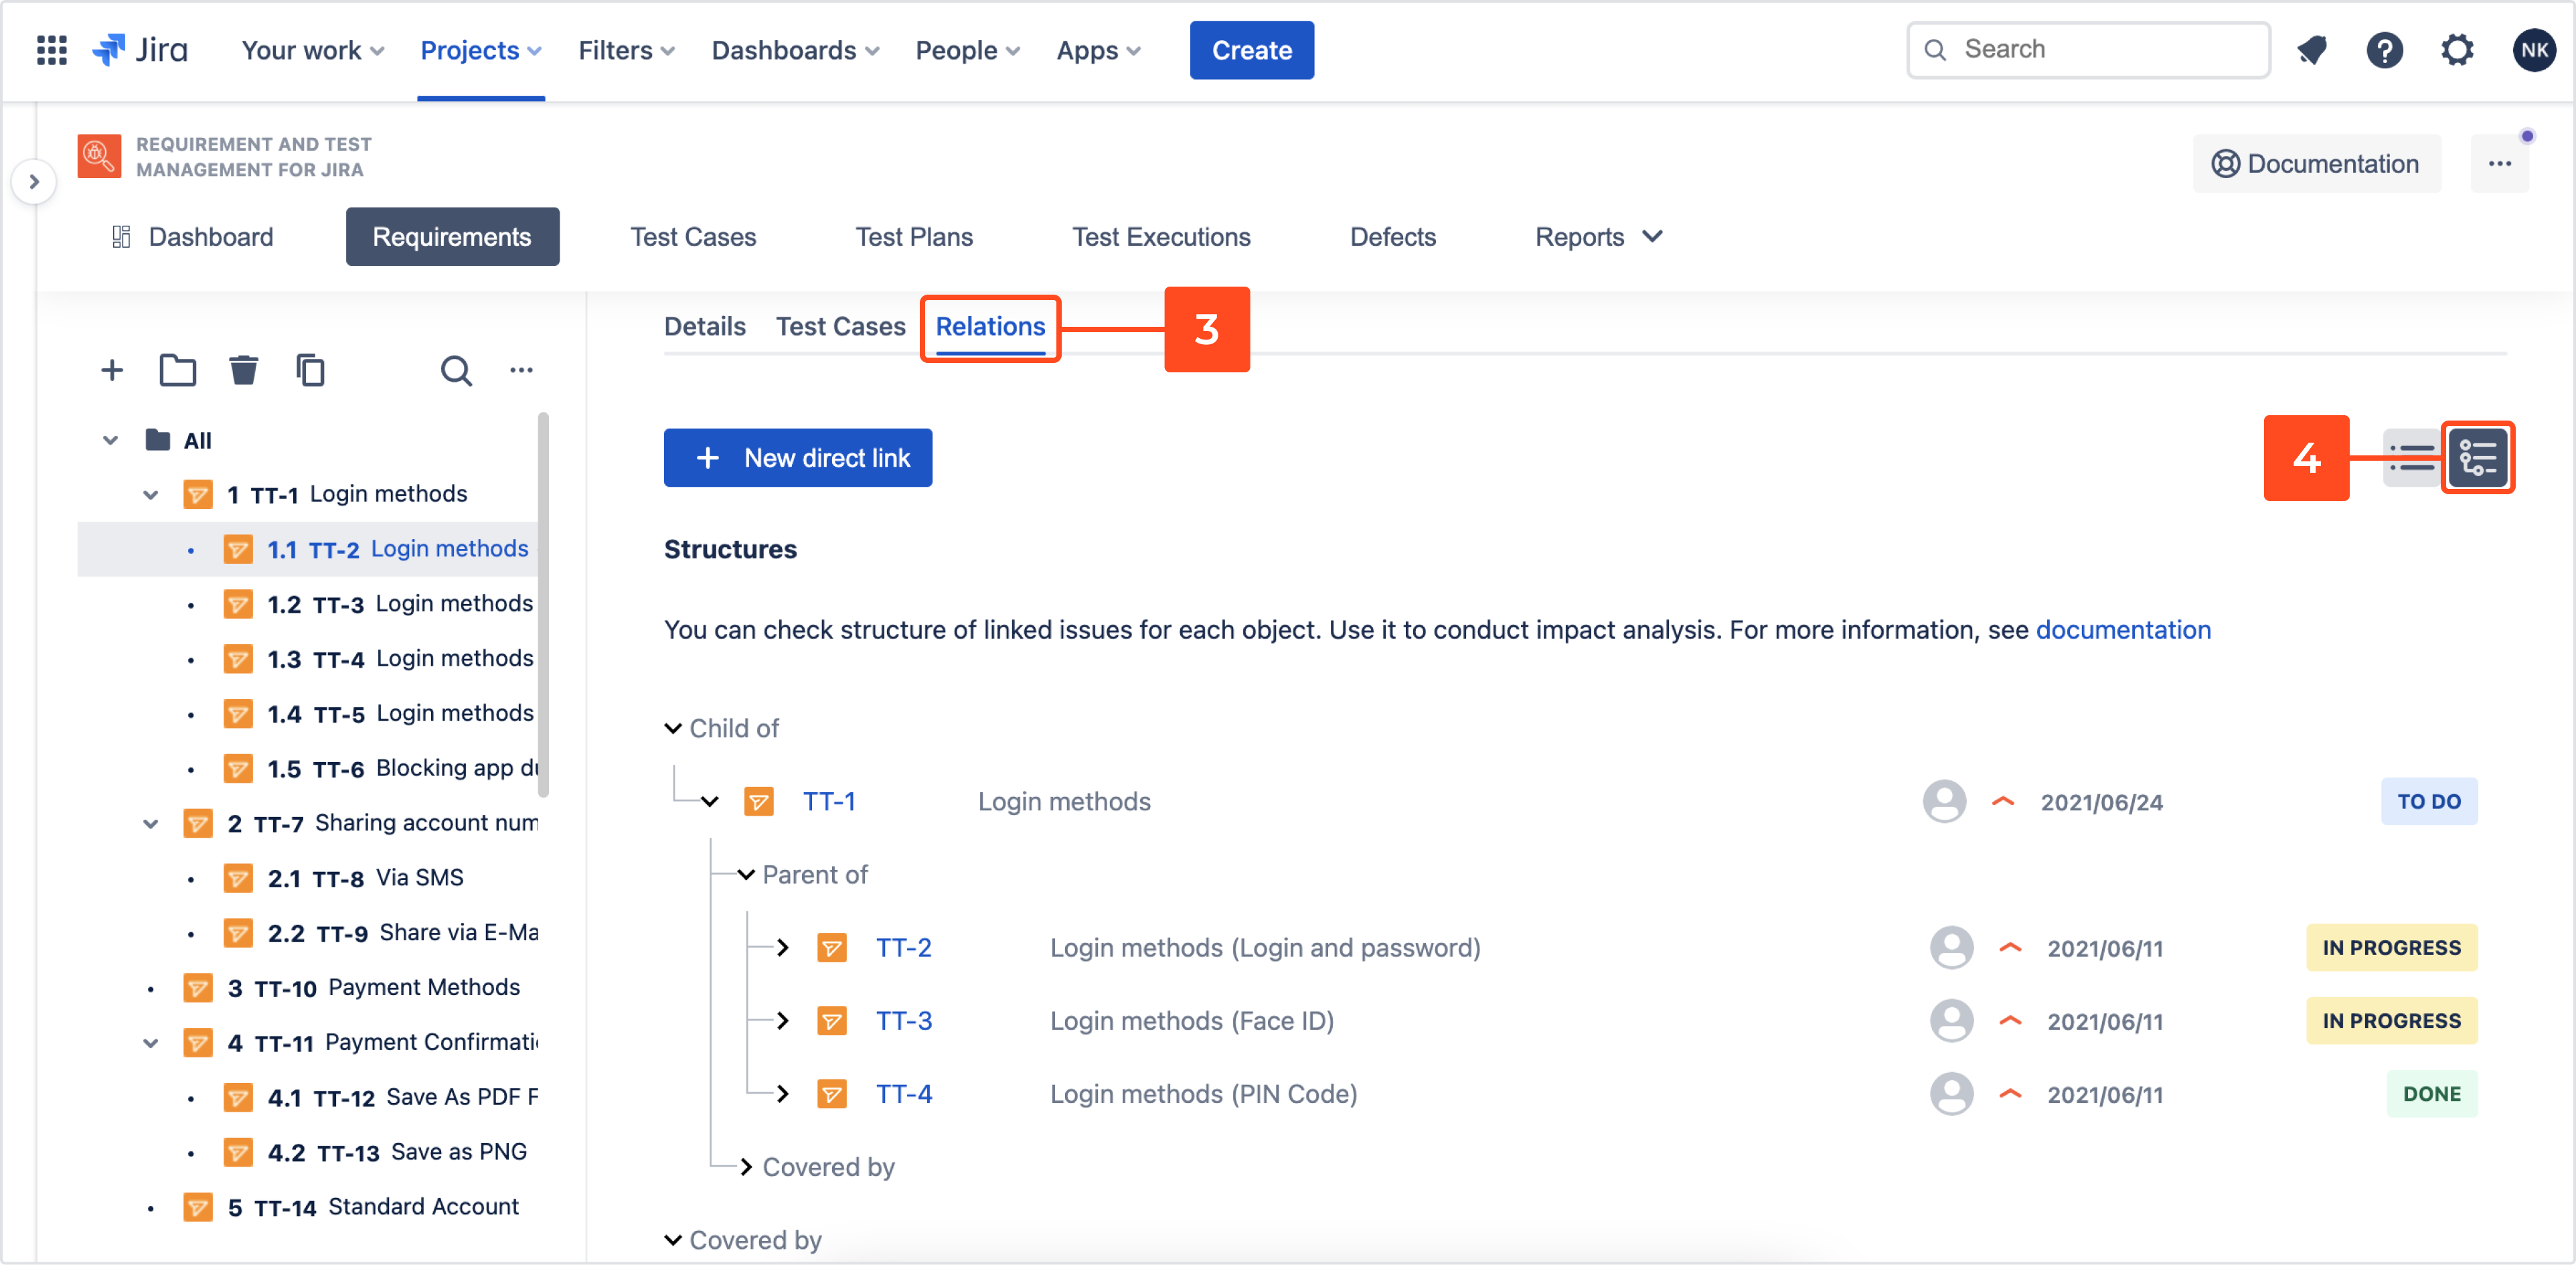 Relations in Requirements and Test Management for Jira